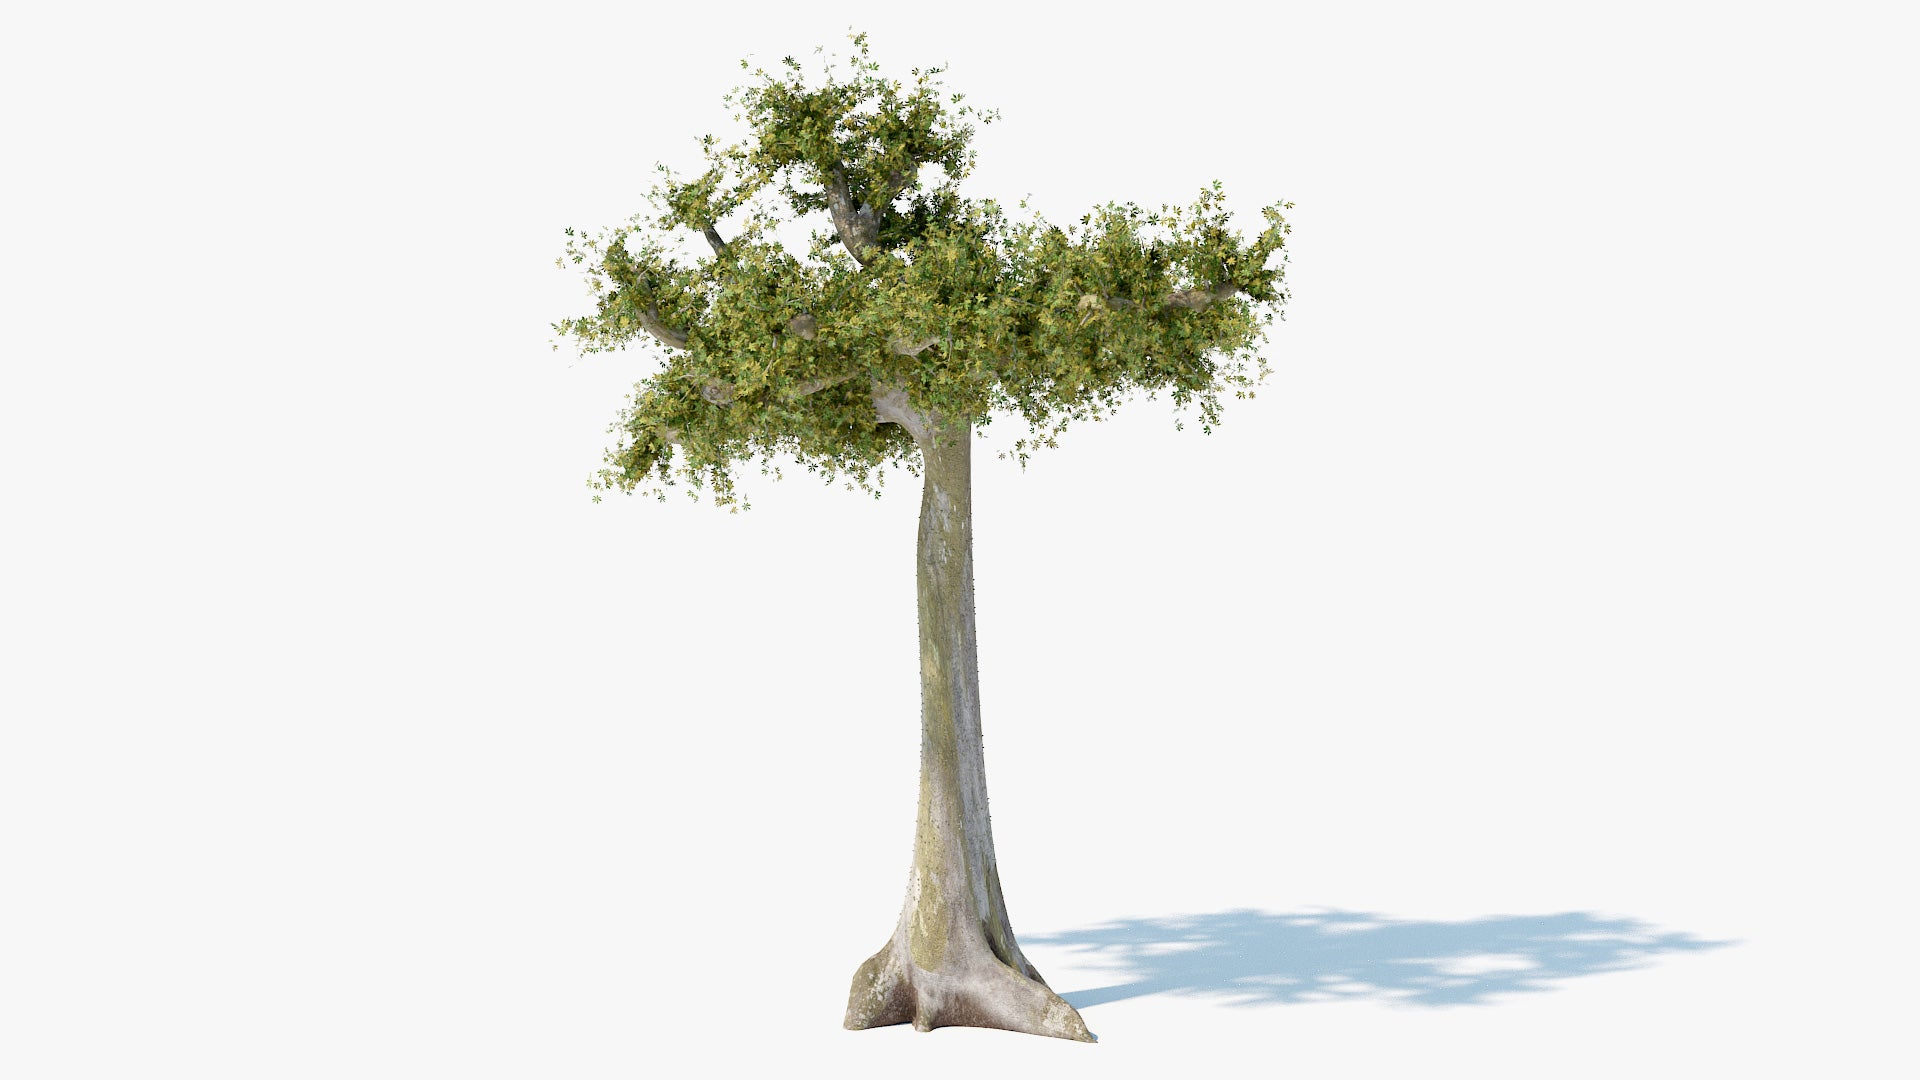 Kapok tree silk cotton 3d model blender obj with pbr textures and low polycount